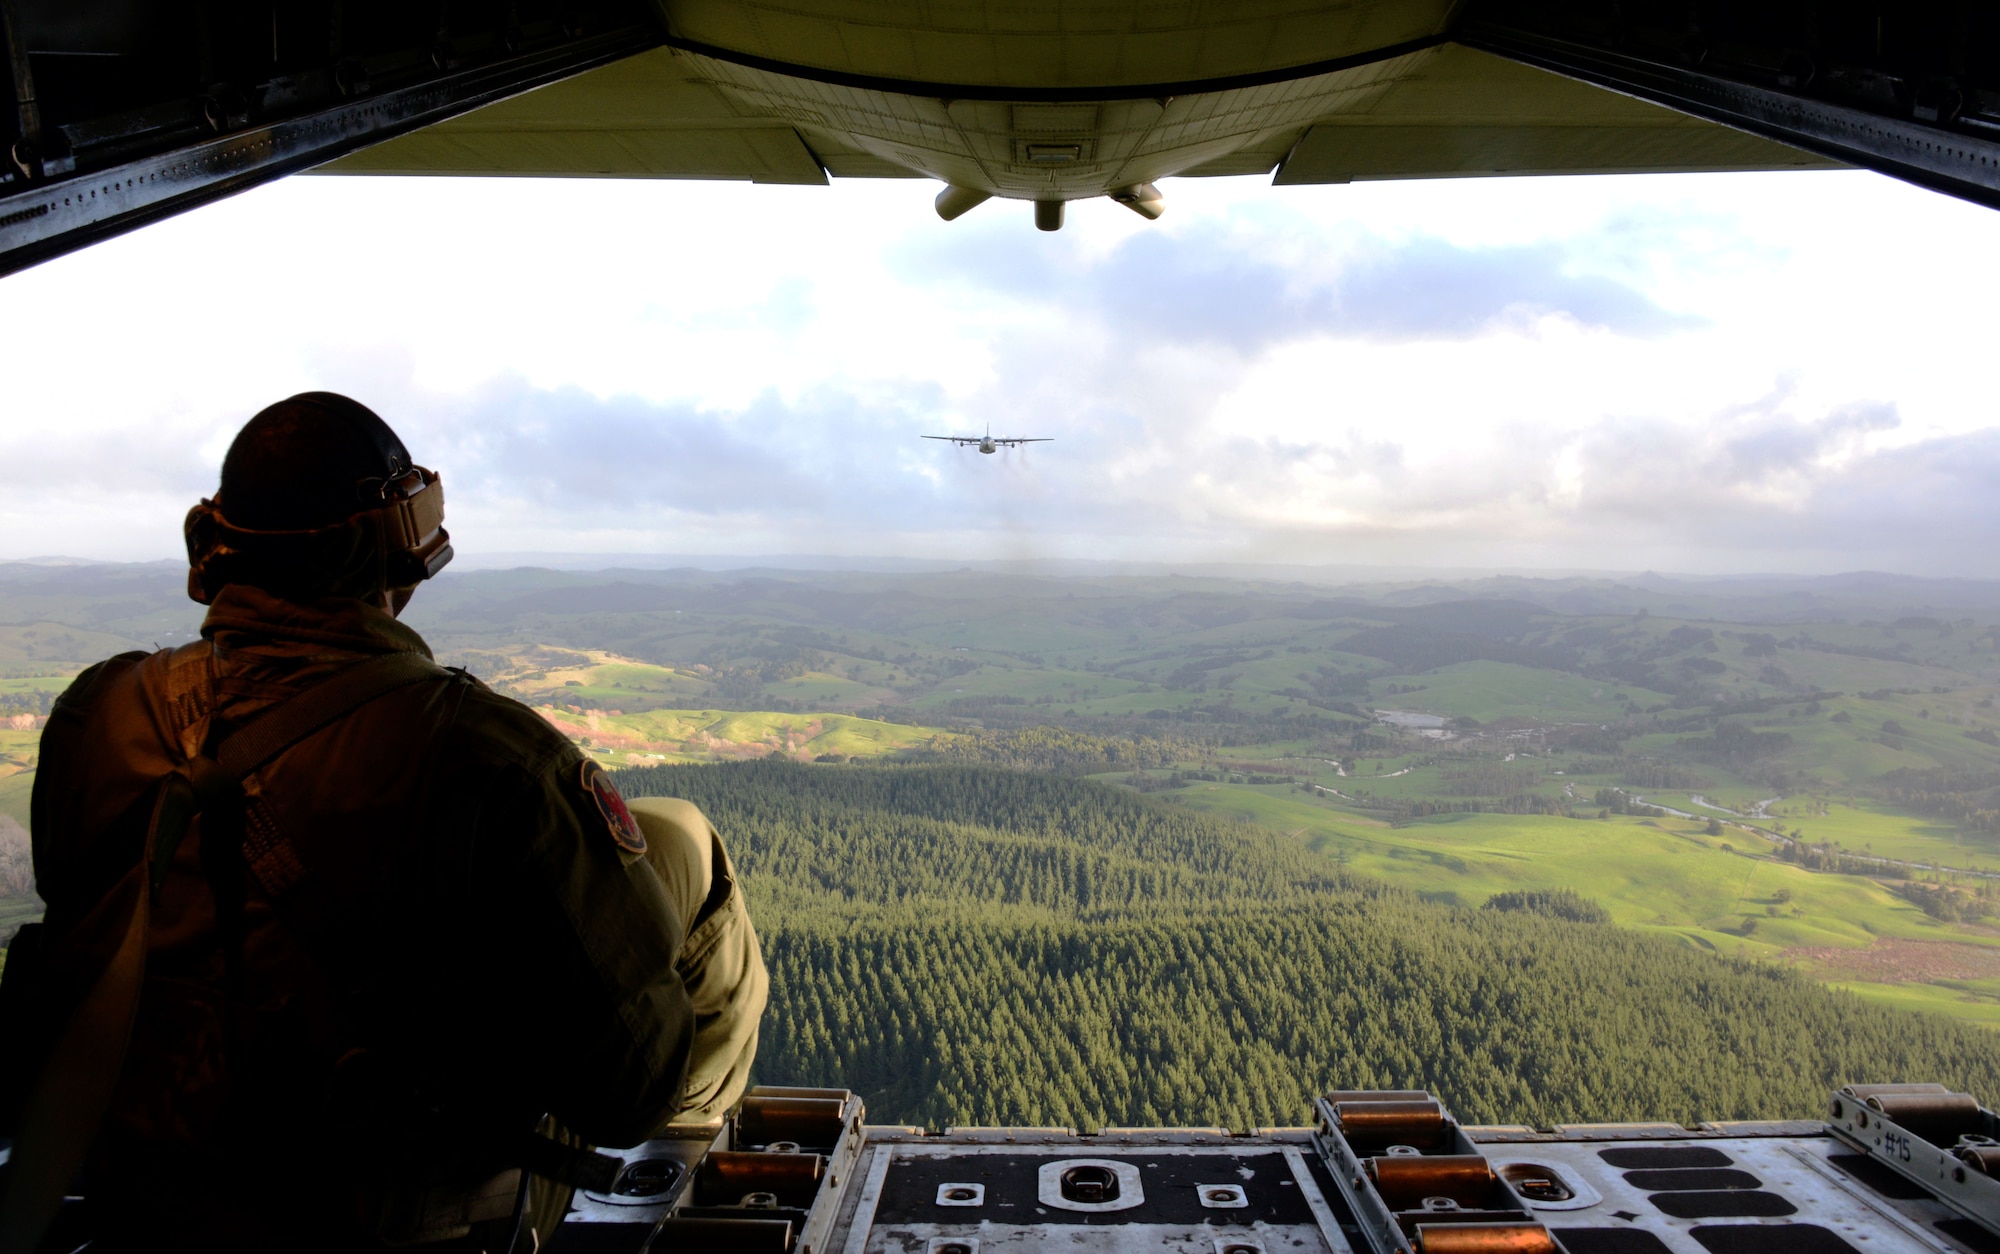 A 1st Special Operations Squadron loadmaster sits on the back of an MC-130H Combat Talon II and watches a Royal New Zealand Air Force C-130 Hercules during a dissimilar formation low level flight June 23, 2016.  Members from the 353rd Special Operations Group participated in Exercise Teak Net June 12 through June 30 in Whenuapai, New Zealand. During the exercise, members from both the New Zealand Defense Force and U.S. Air Force worked together to conduct personnel and equipment air drops together while exchanging new techniques. (U.S. Air Force photo by Master Sgt. Kristine Dreyer)